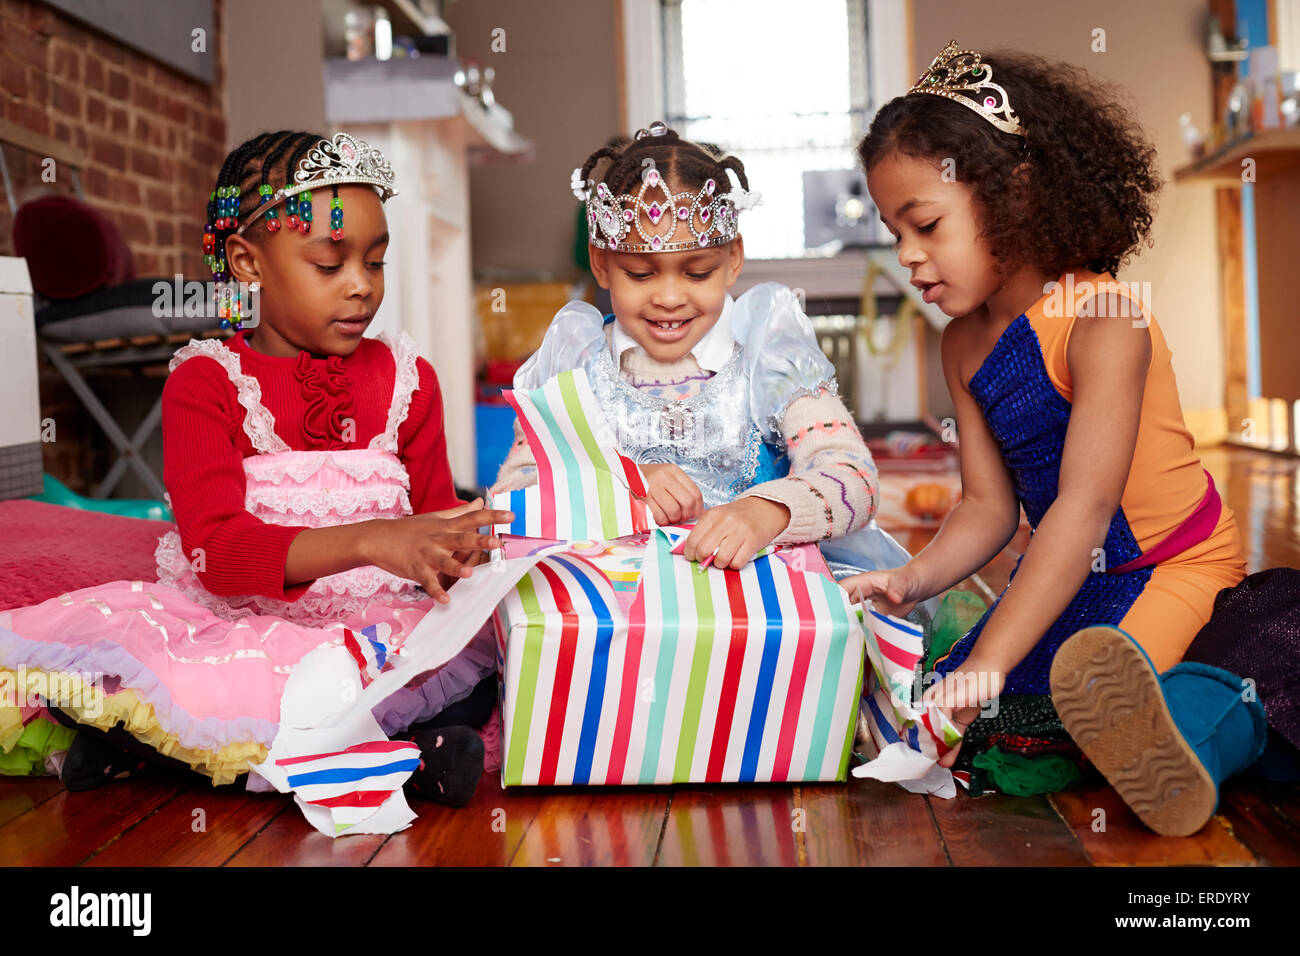 Girls with tiaras opening gifts at party Stock Photo